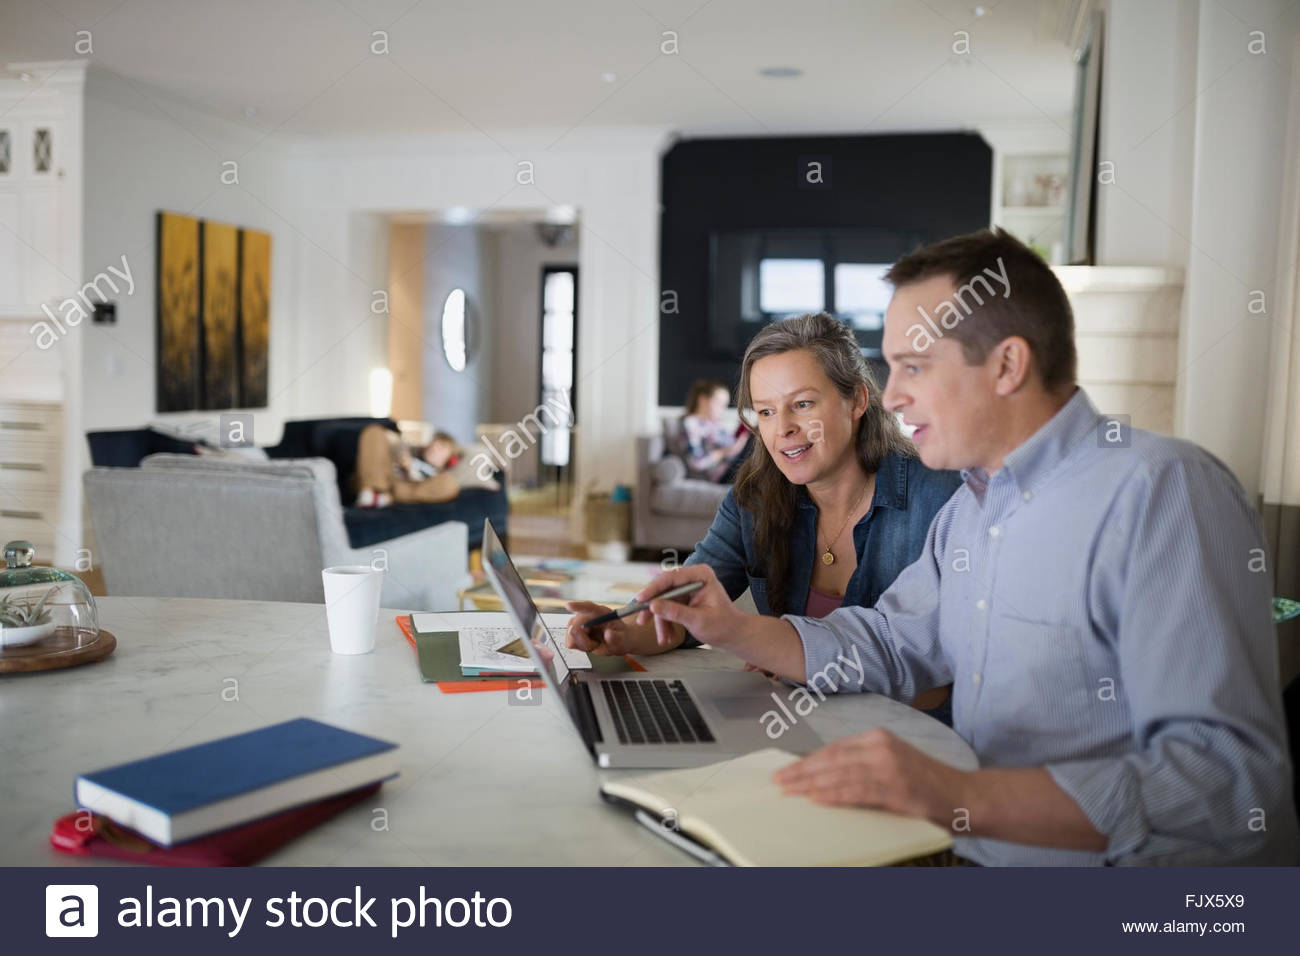 Couple using laptop at kitchen table Stock Photo